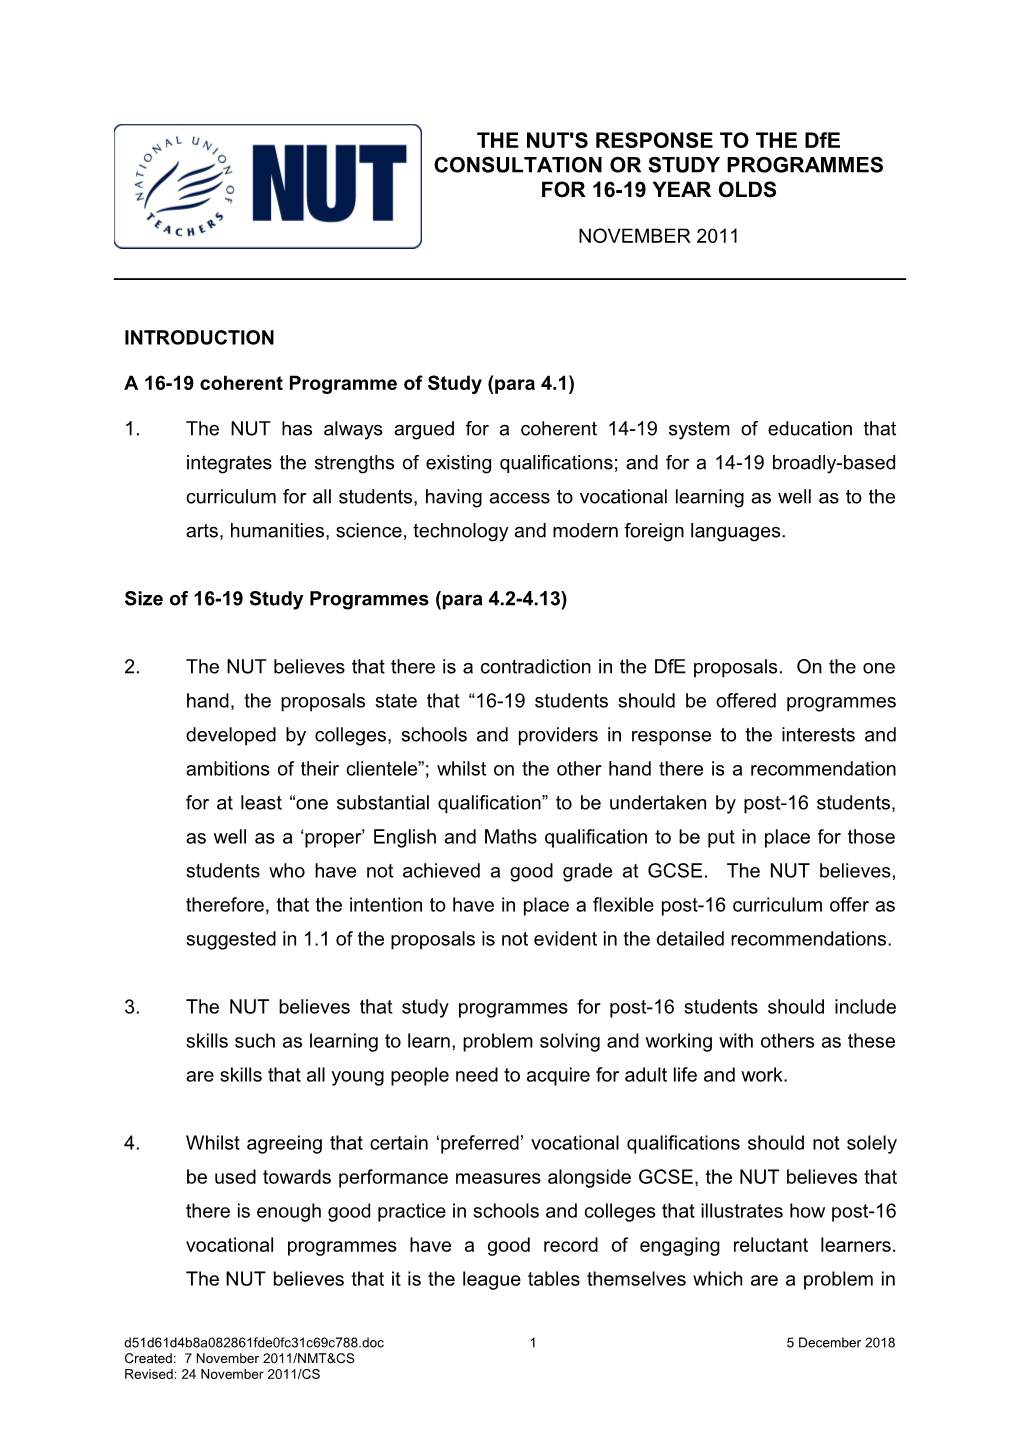 A 16-19 Coherent Programme of Study (Para 4.1)